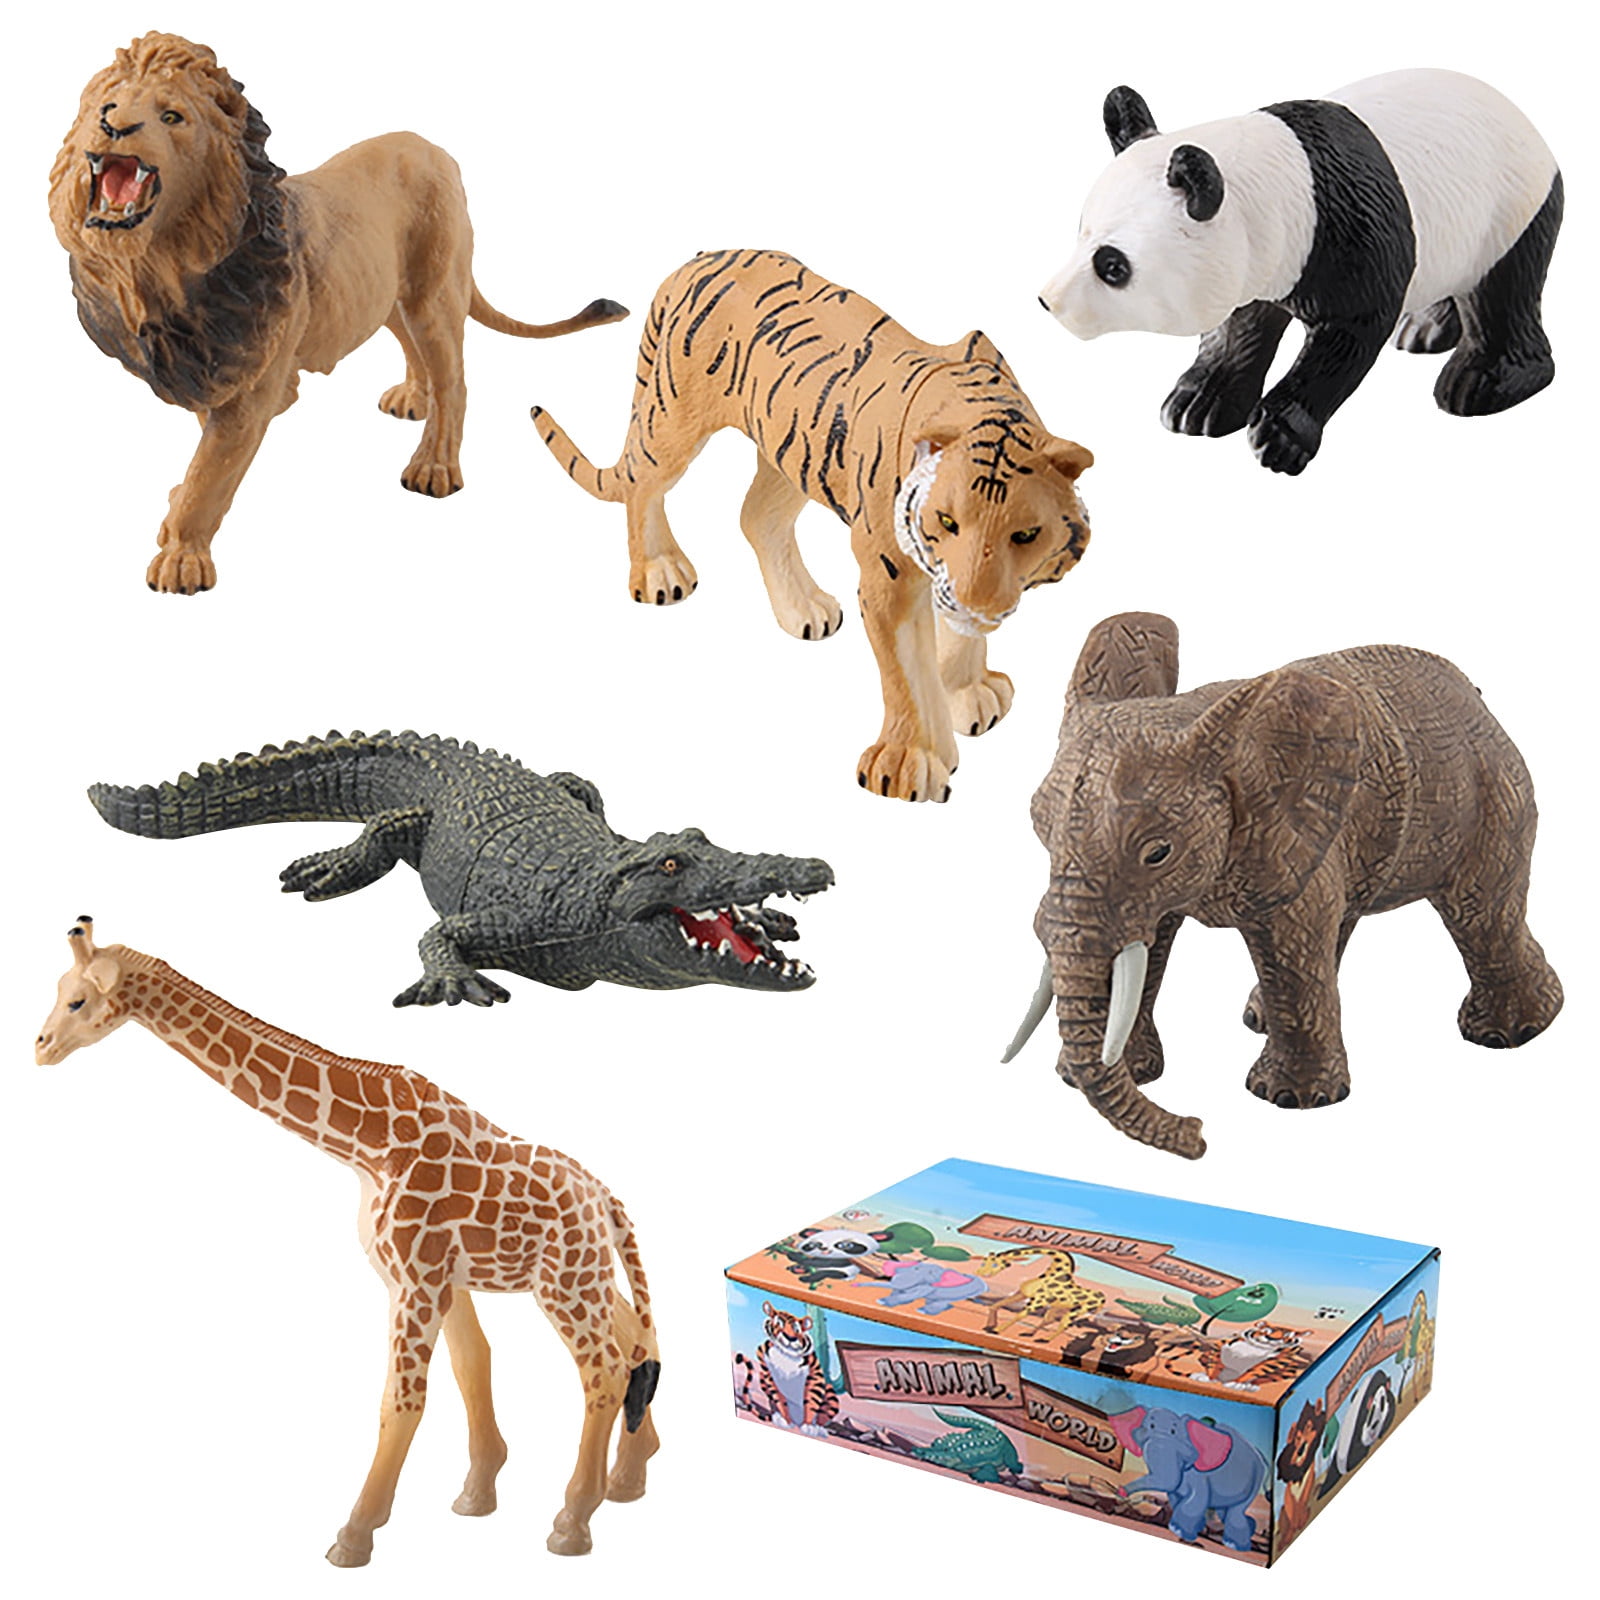 JNGSA Christmas Gifts, 1Year Old Boy Toys Animal Toys Figurines Zoo Pack  for Kids Gift Preschool Educational 6 Animals Set 